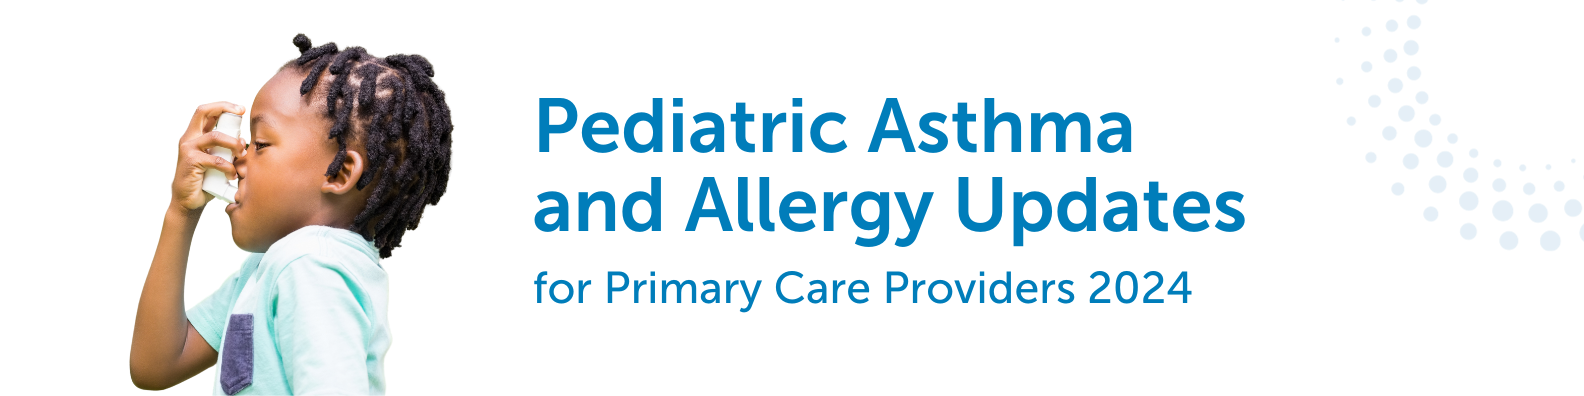 Pediatric Asthma & Allergy Updates for Primary Care Providers 2024 Banner